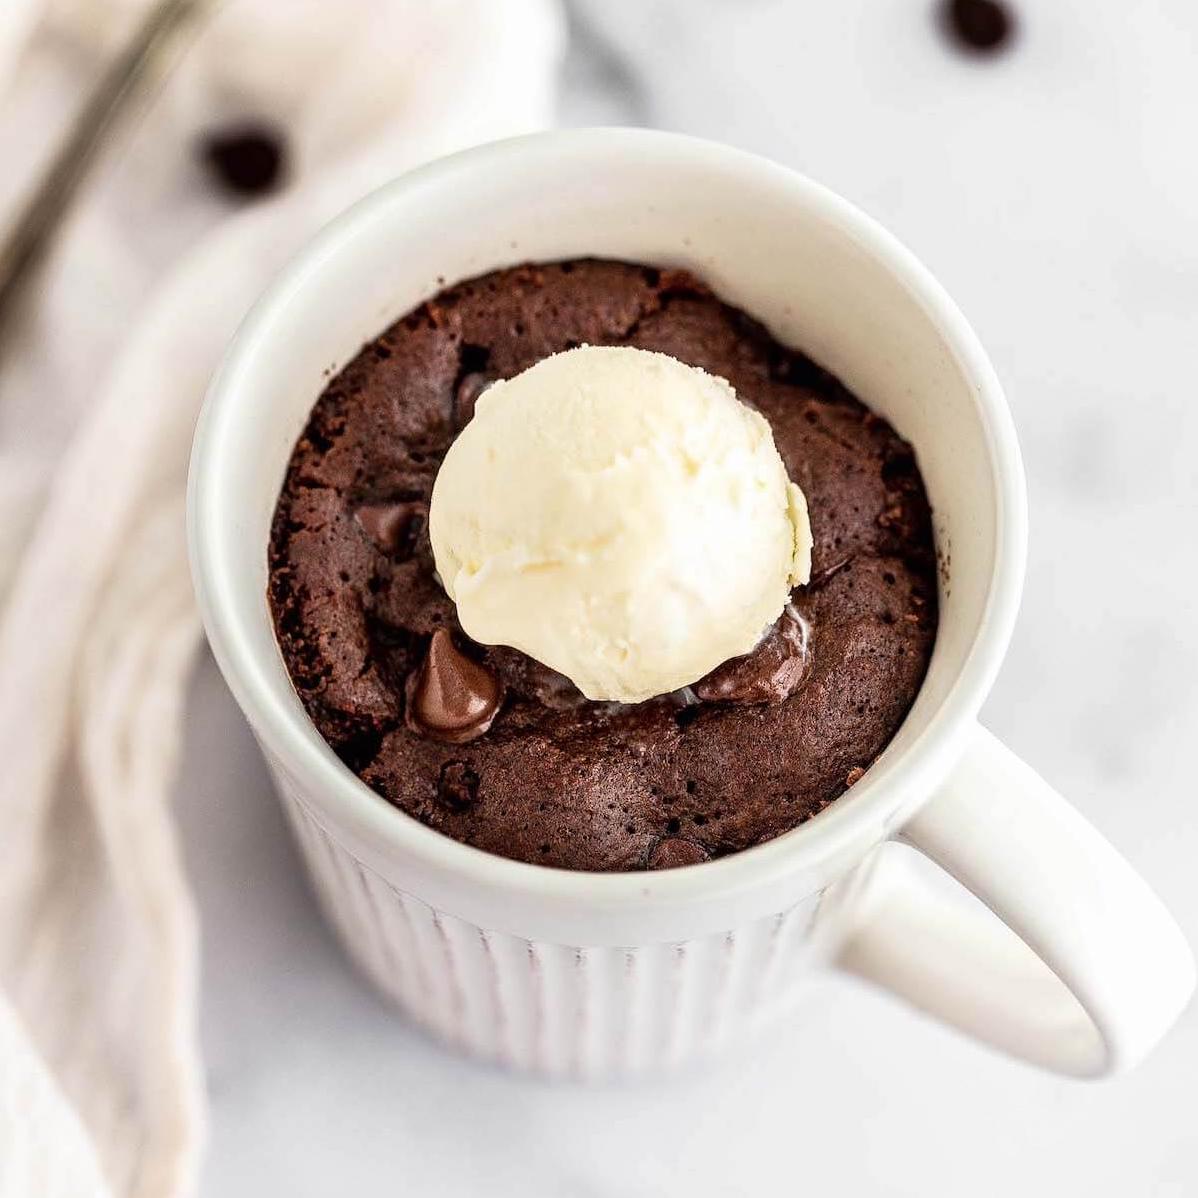  Indulge in a delicious slice of heaven with our coffee mug chocolate cake recipe!